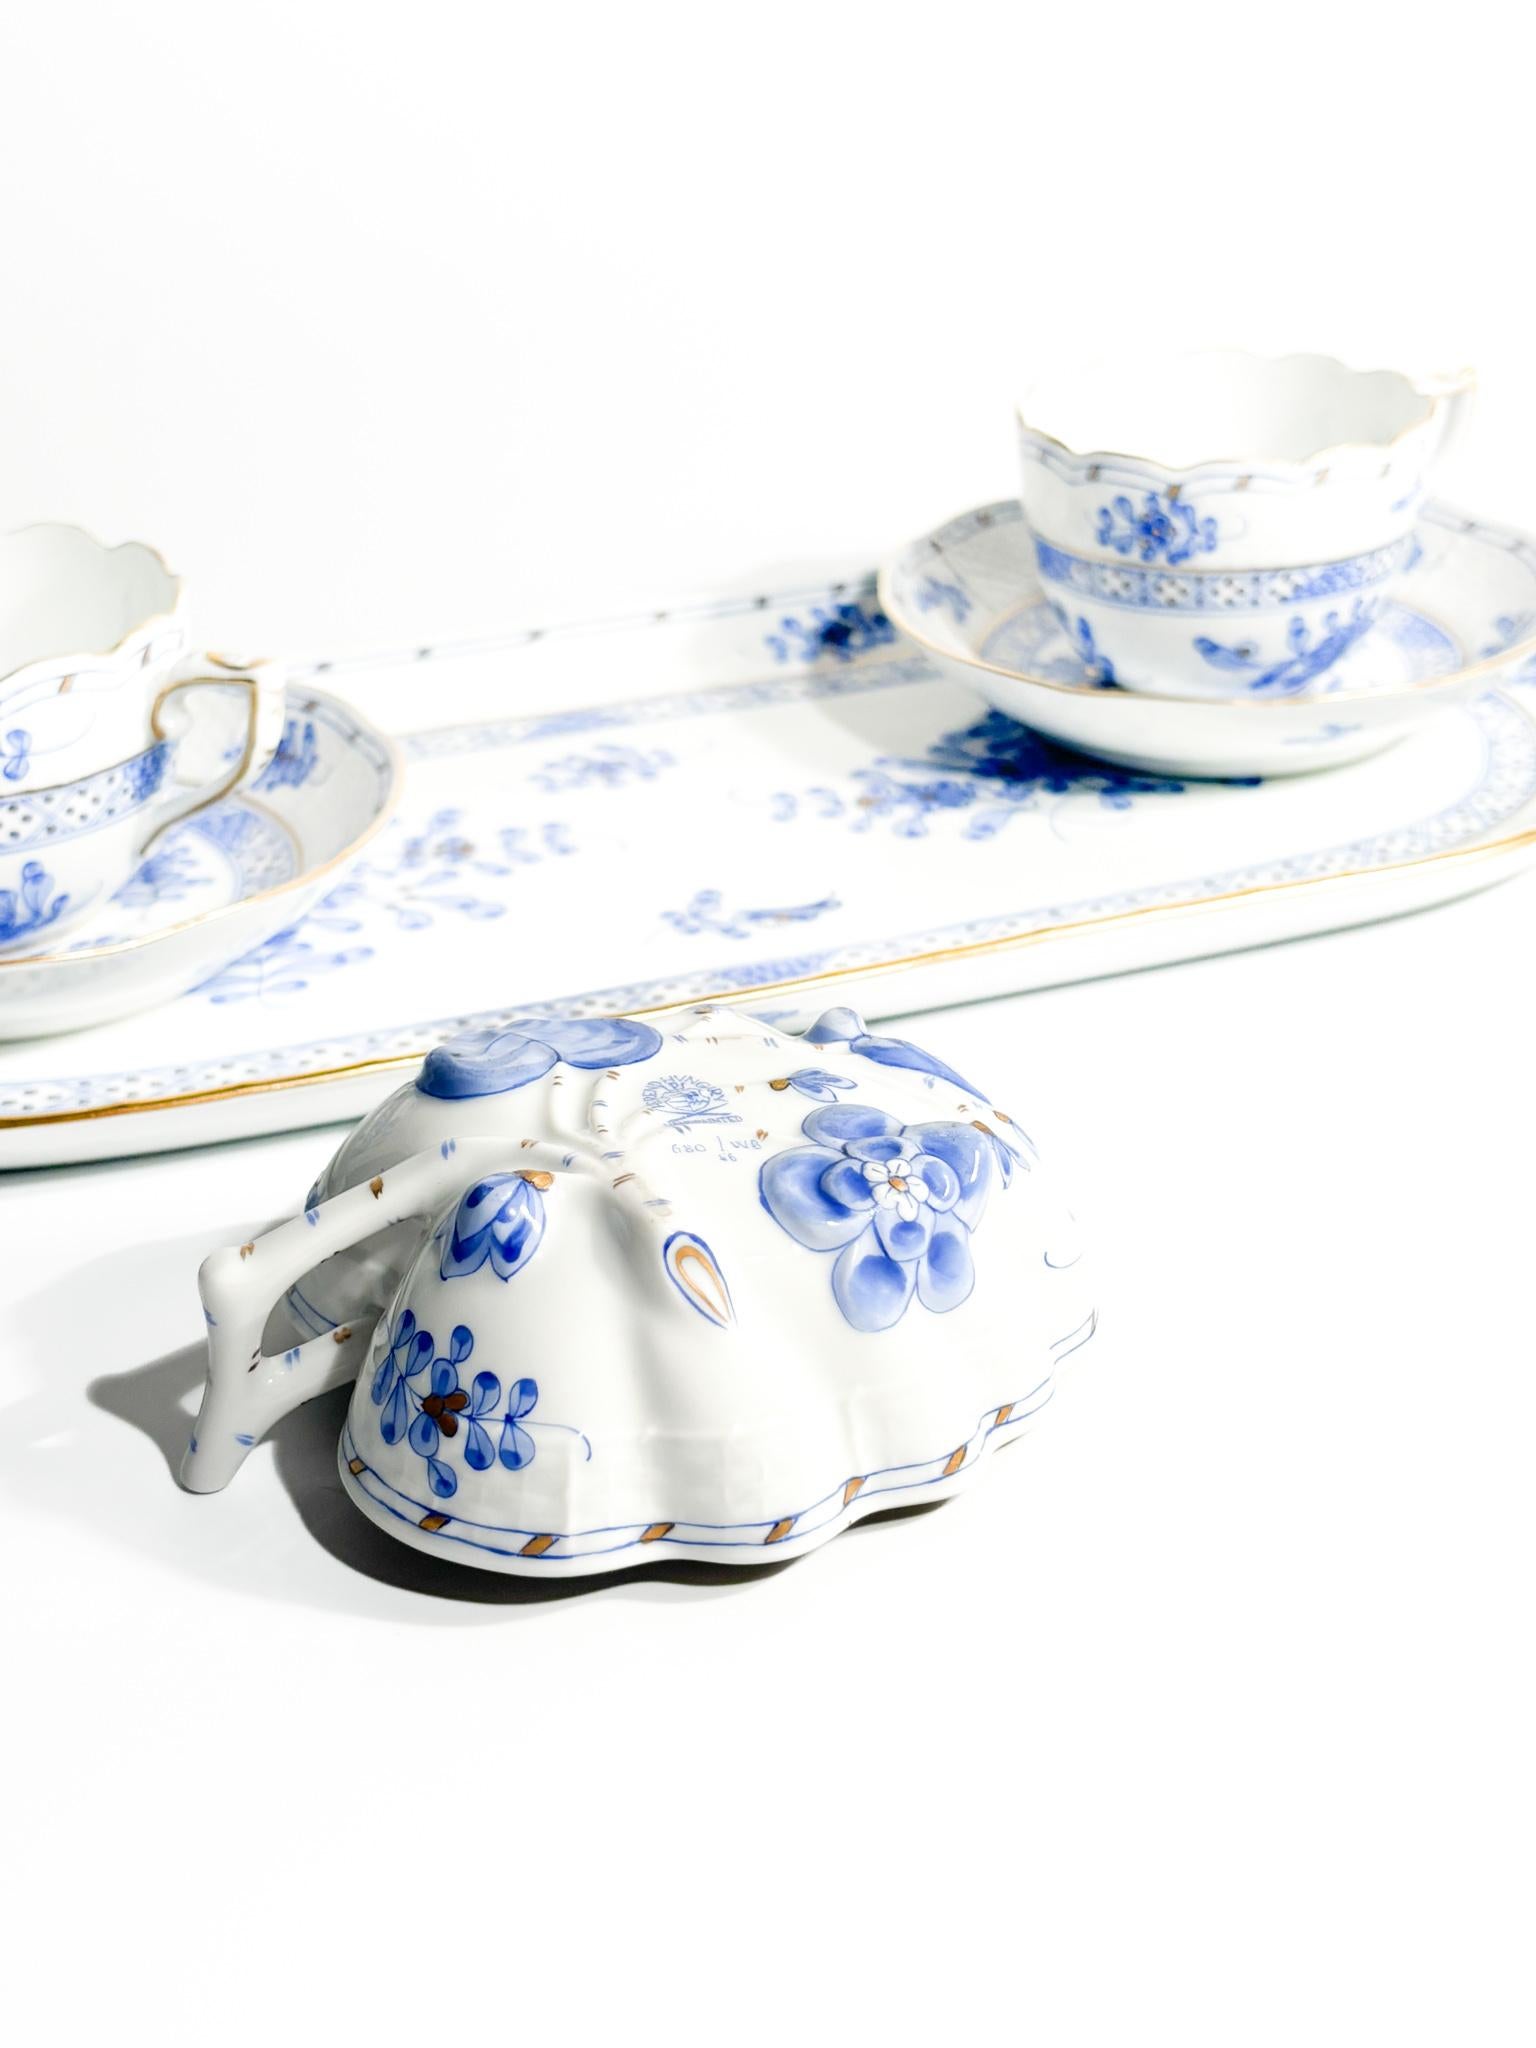 Herend Waldstein Porcelain Tete a Tete Service from the 1950s For Sale 8